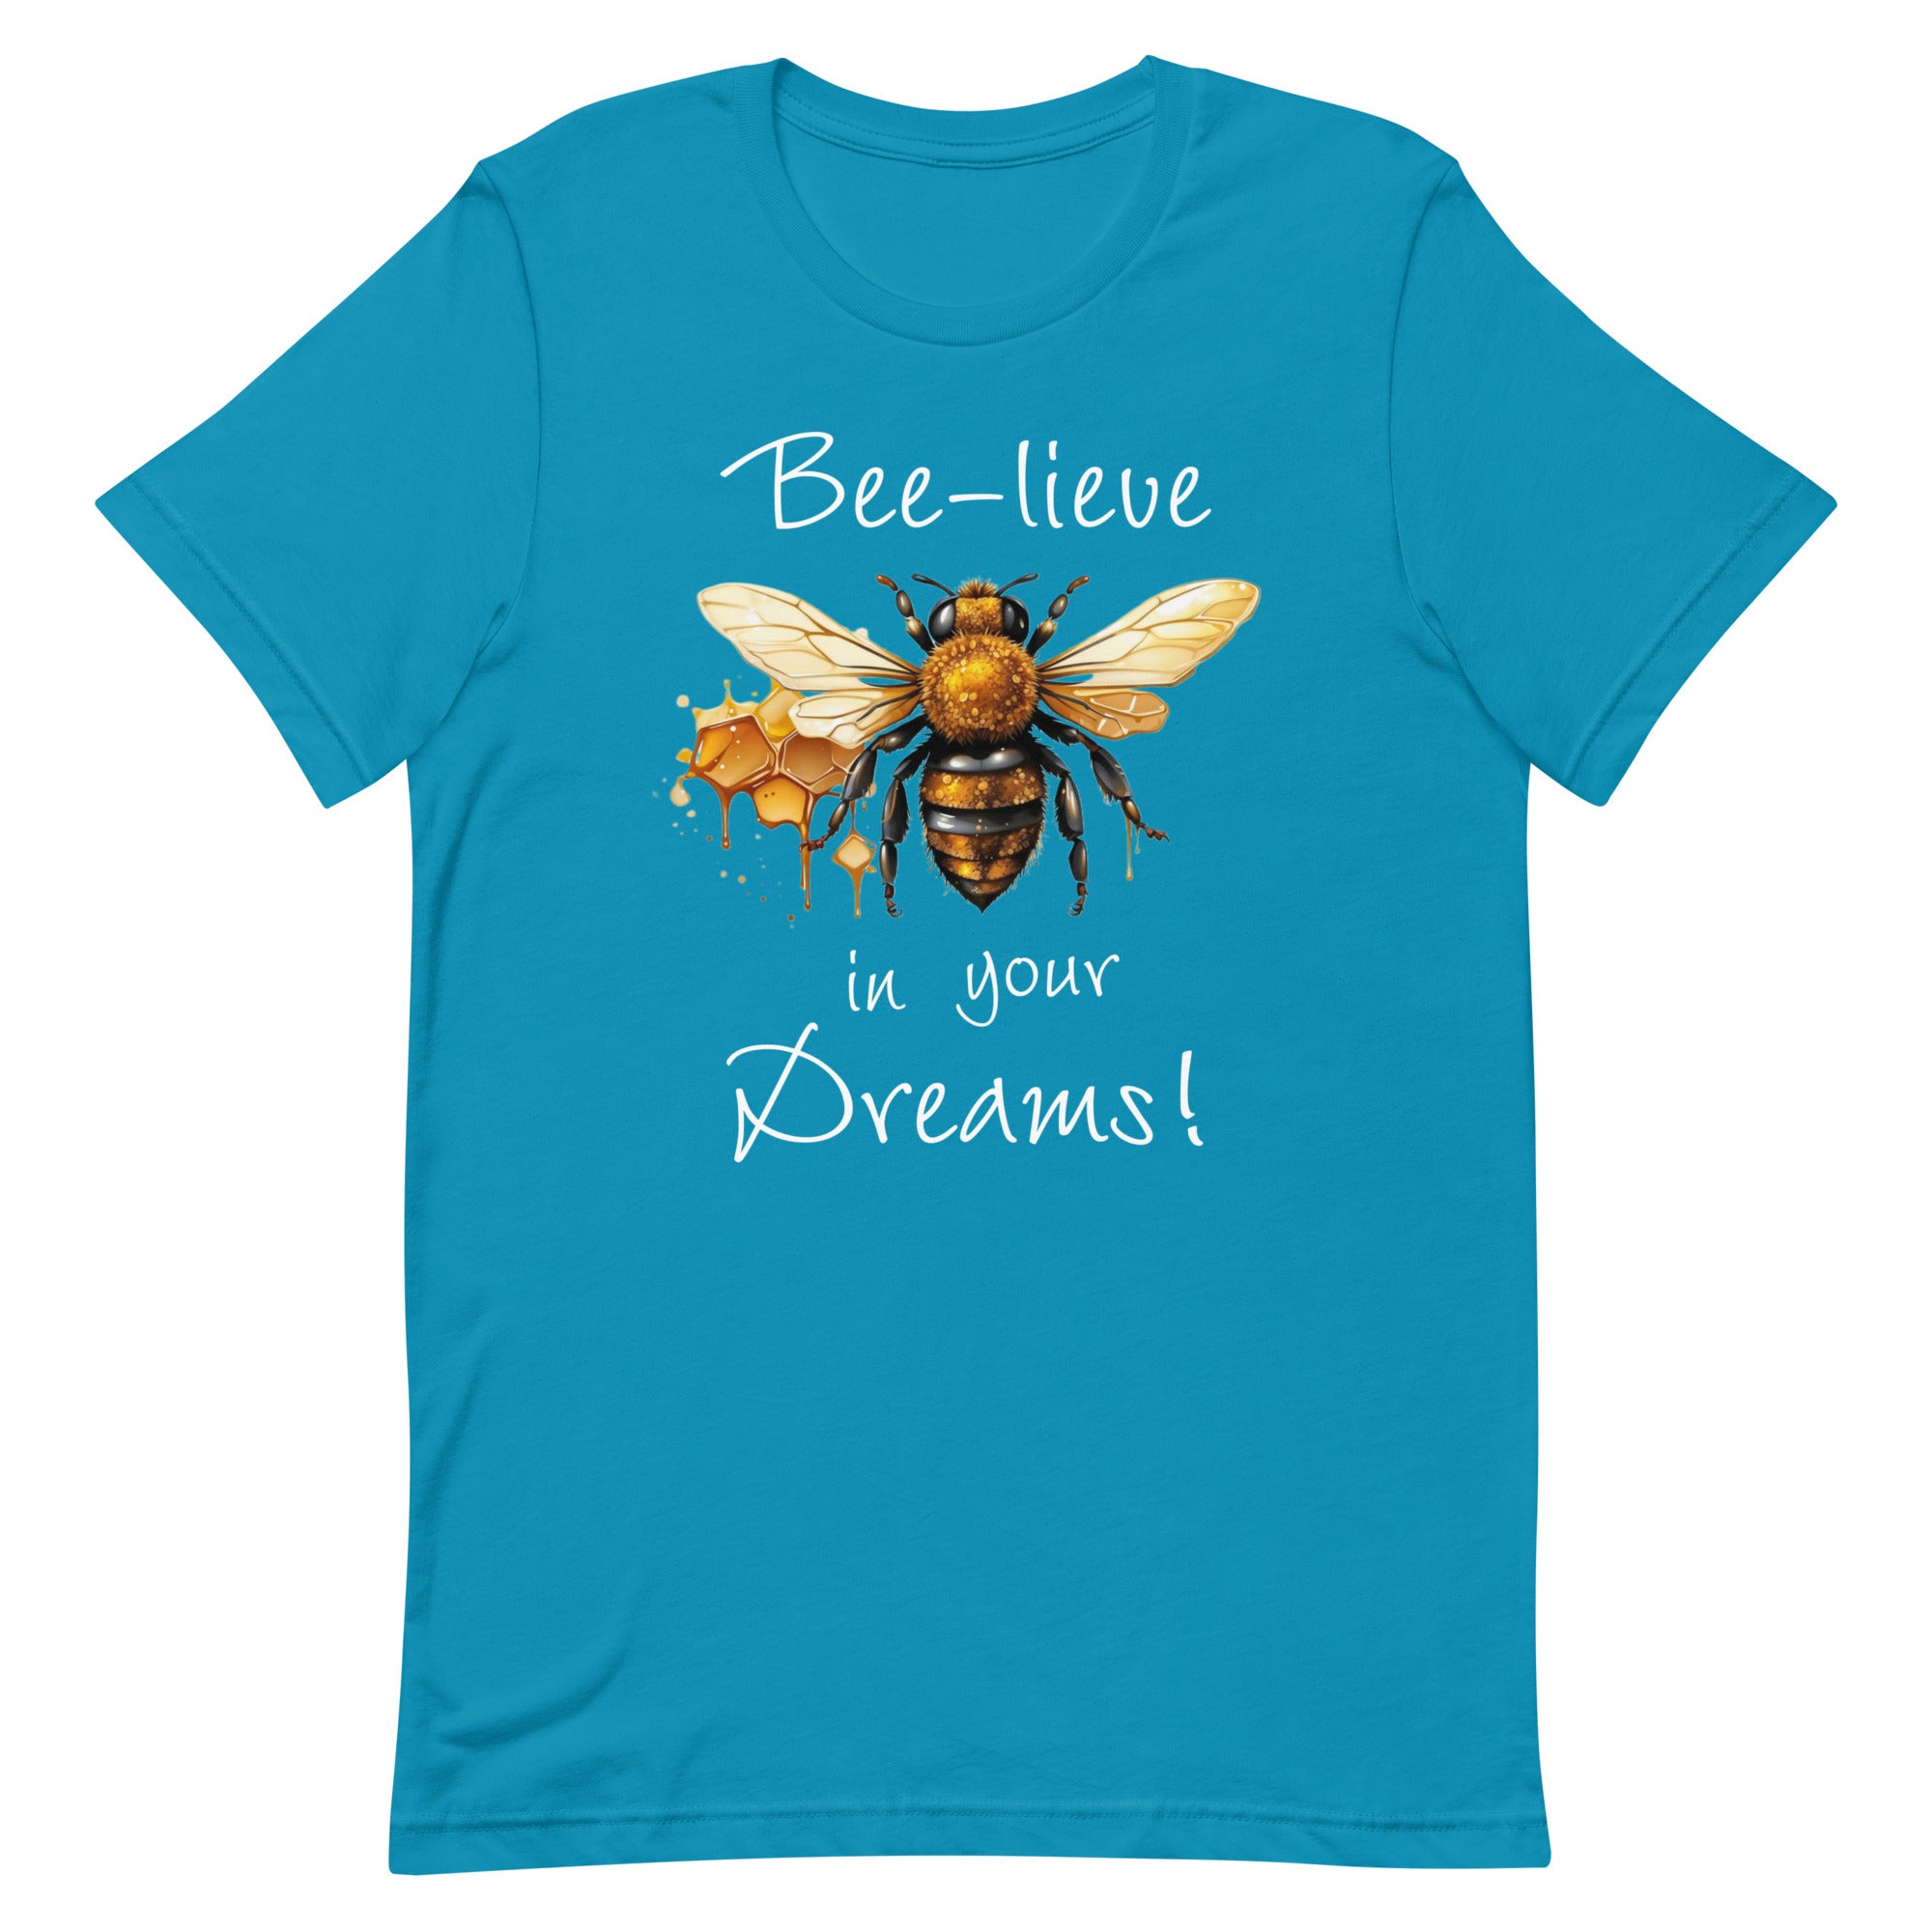 Bee-lieve in Your Dreams T-Shirt, Gift for Bee Lovers Aqua M L XL S DenBox